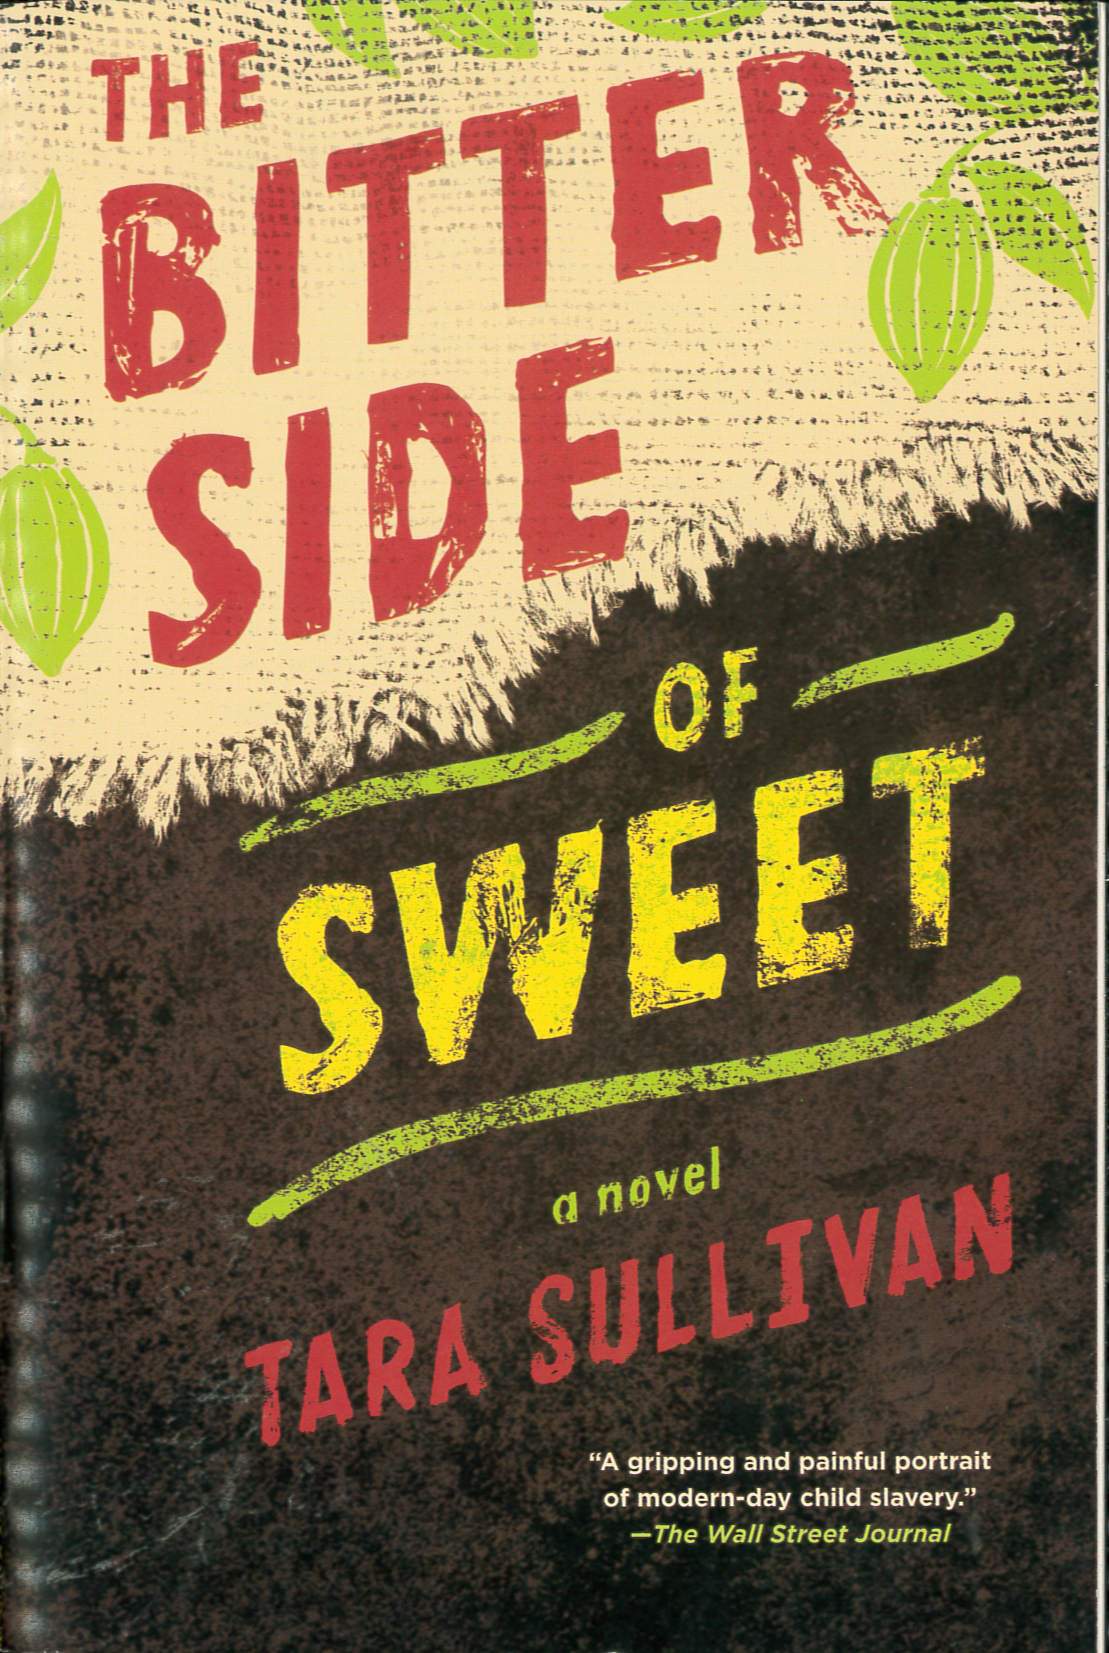 The bitter side of sweet /